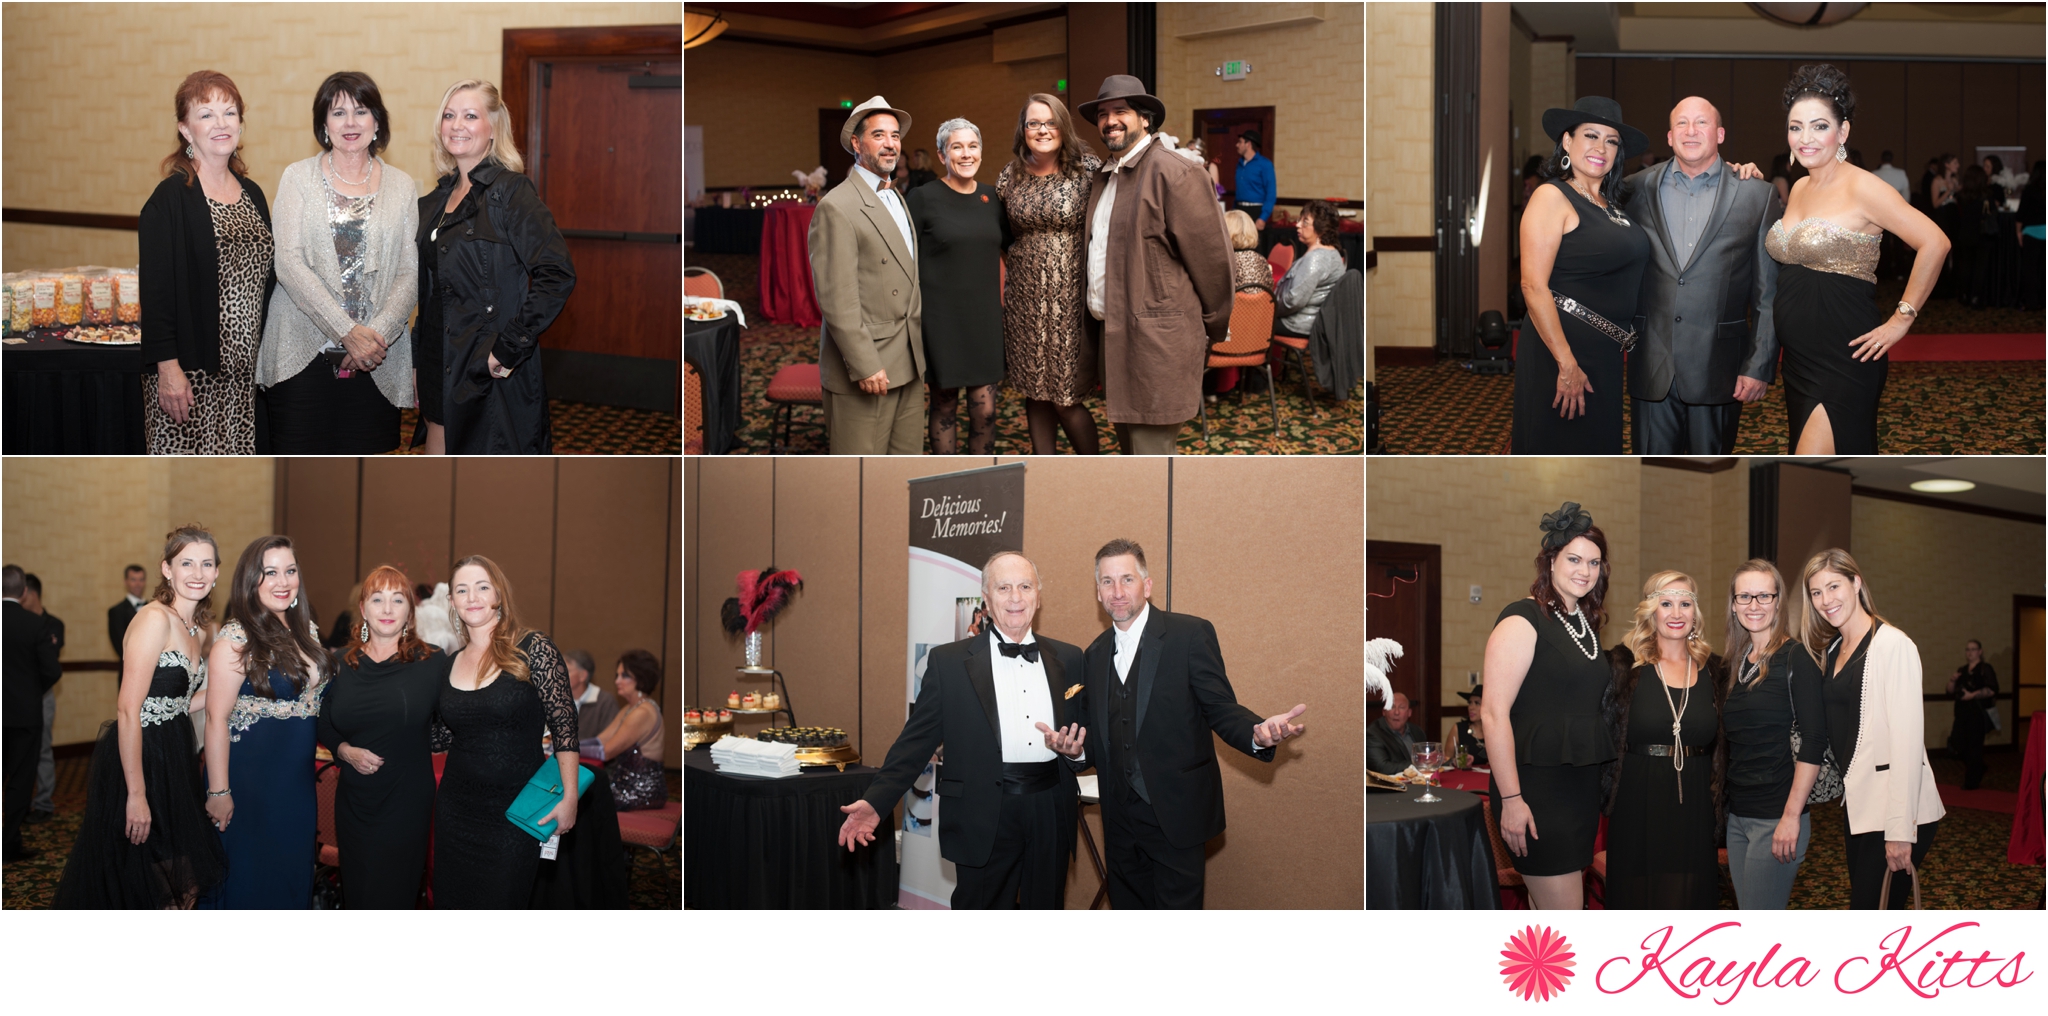 kayla kitts photography - perfect wedding guide - client appreciation party - albuqueruqe marriott_0007.jpg